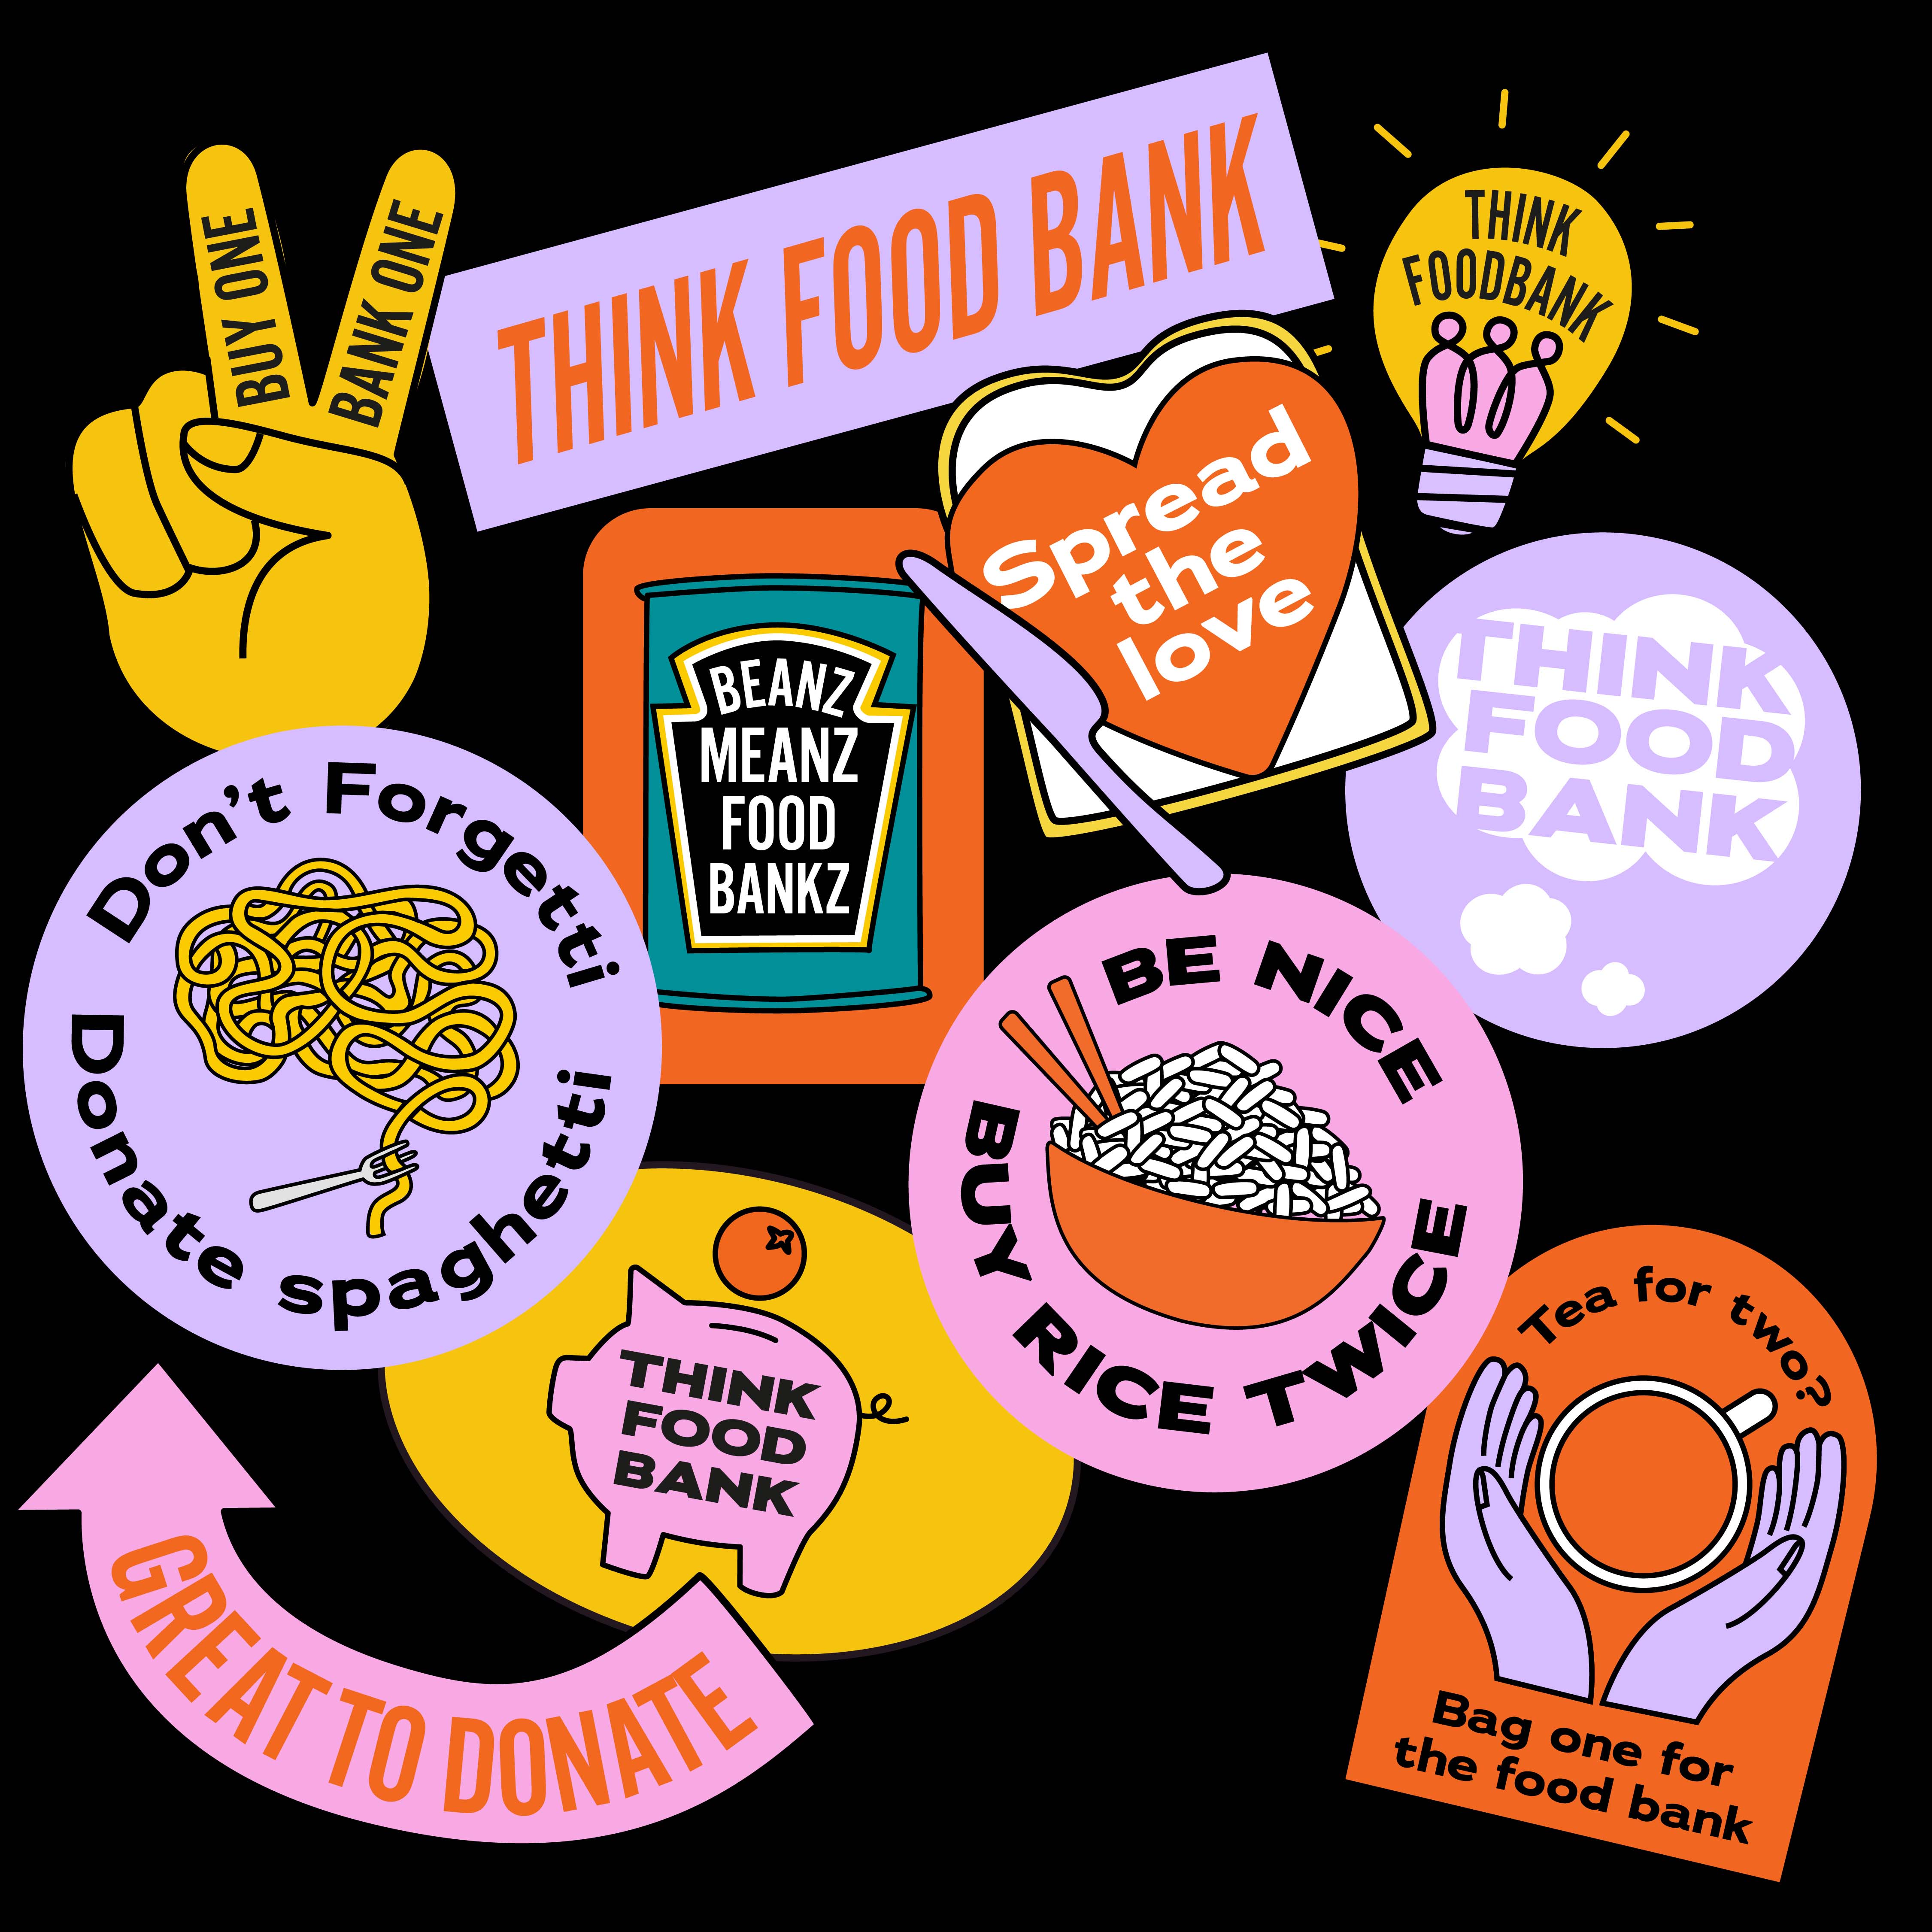 Holly & Maisie Create a Campaign to Remind Shoppers to Think Food Bank